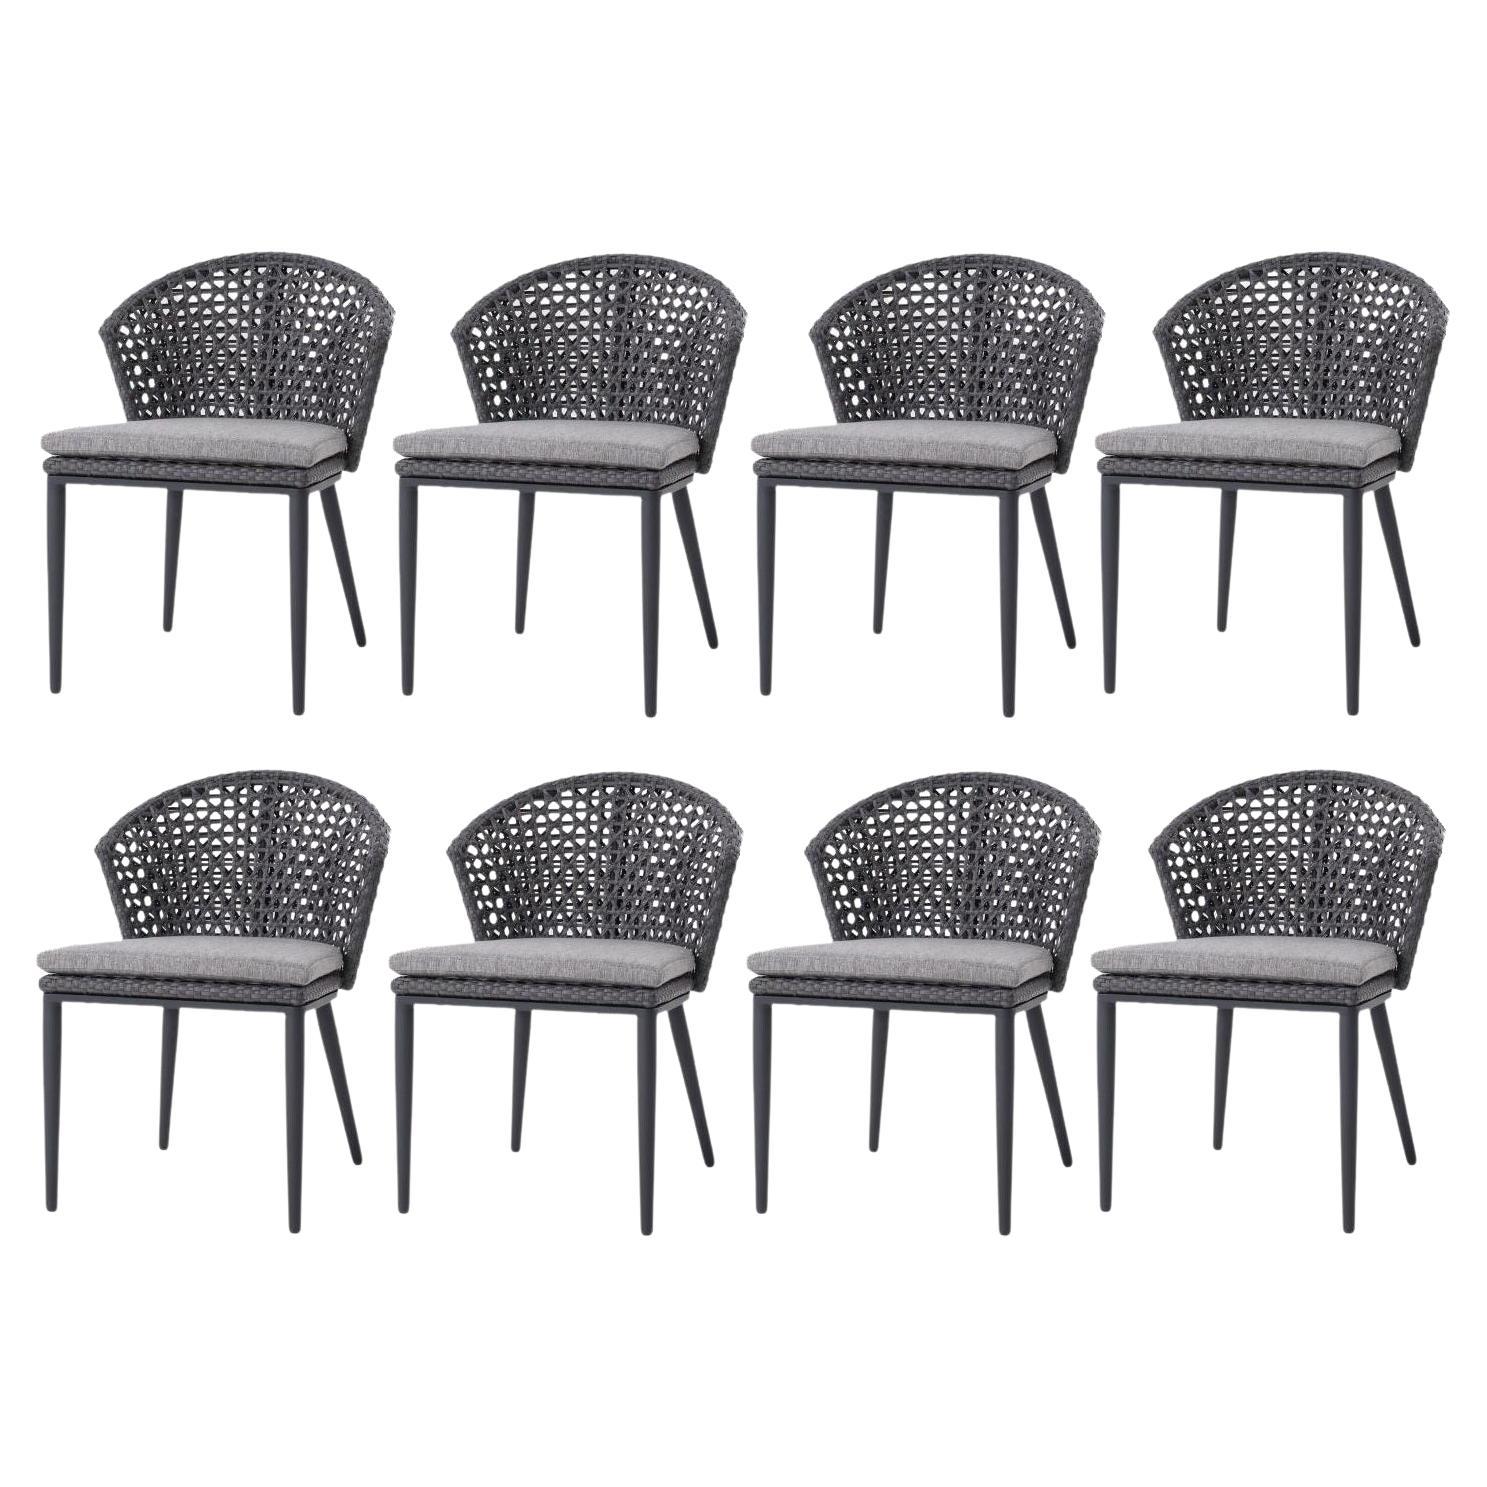 Outdoor Dining Chairs in Anthracite Weather Resistant Wicker / Set of 8